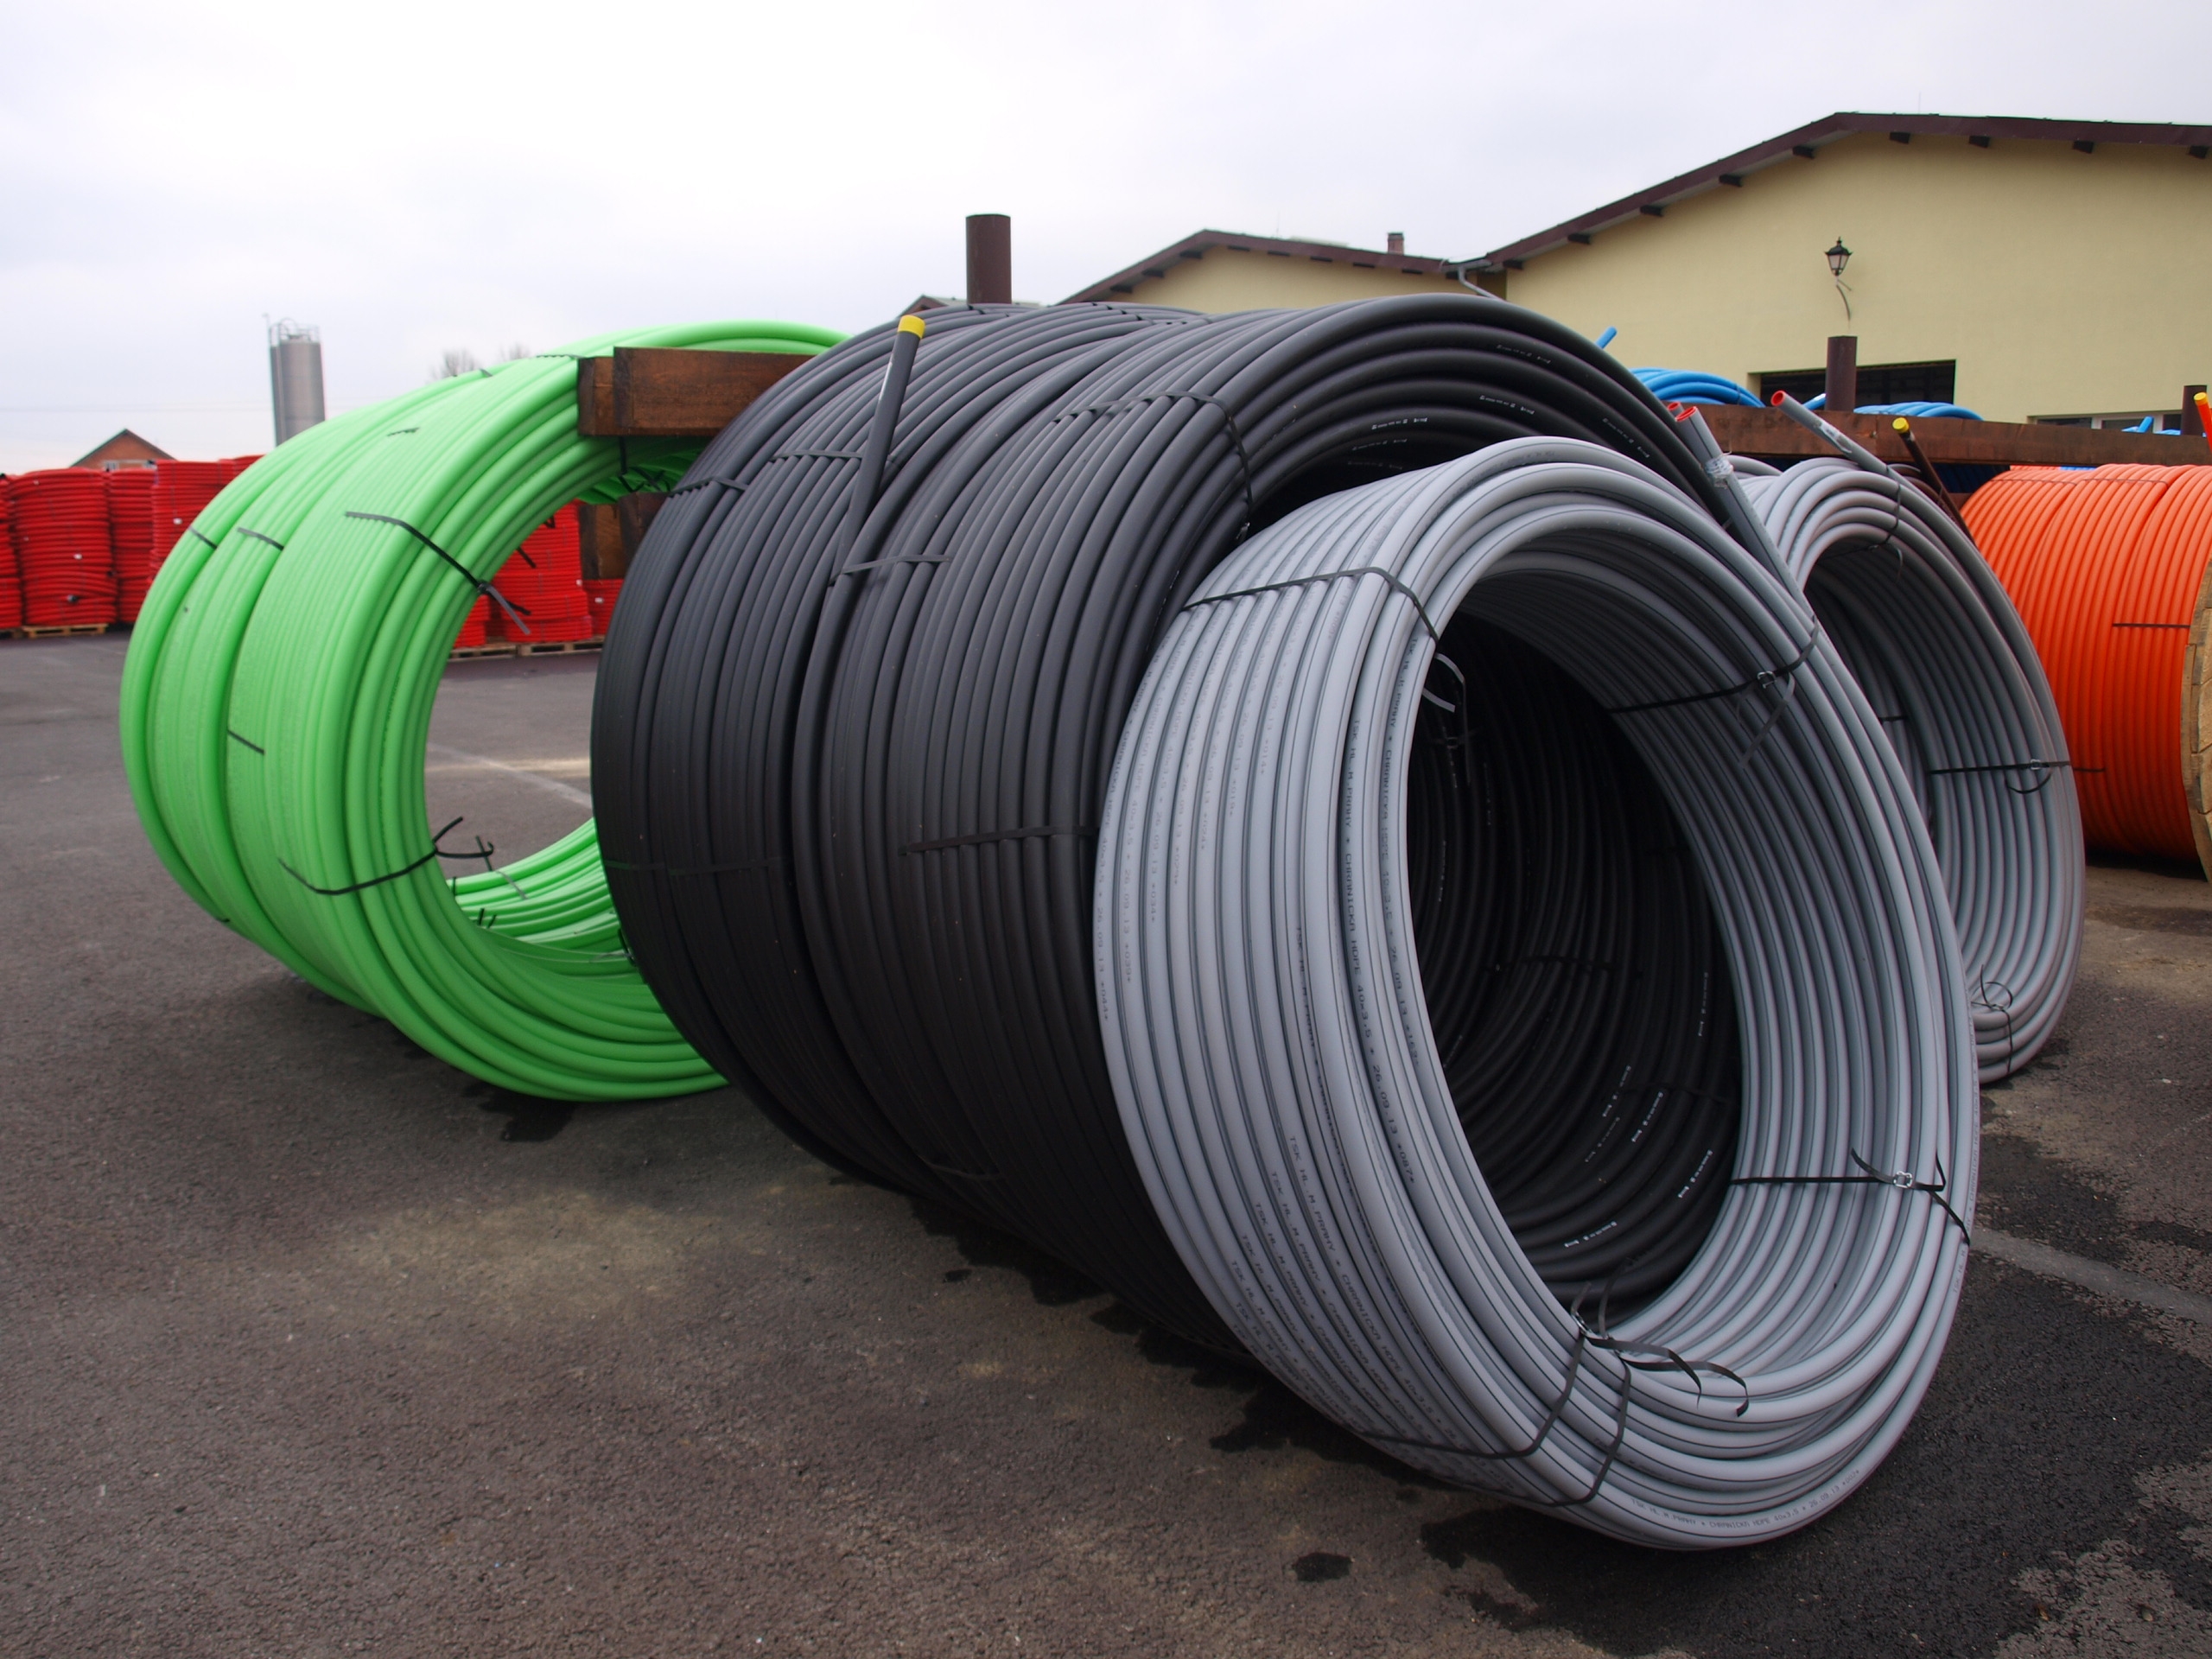 Single-walled protective pipes, small coil